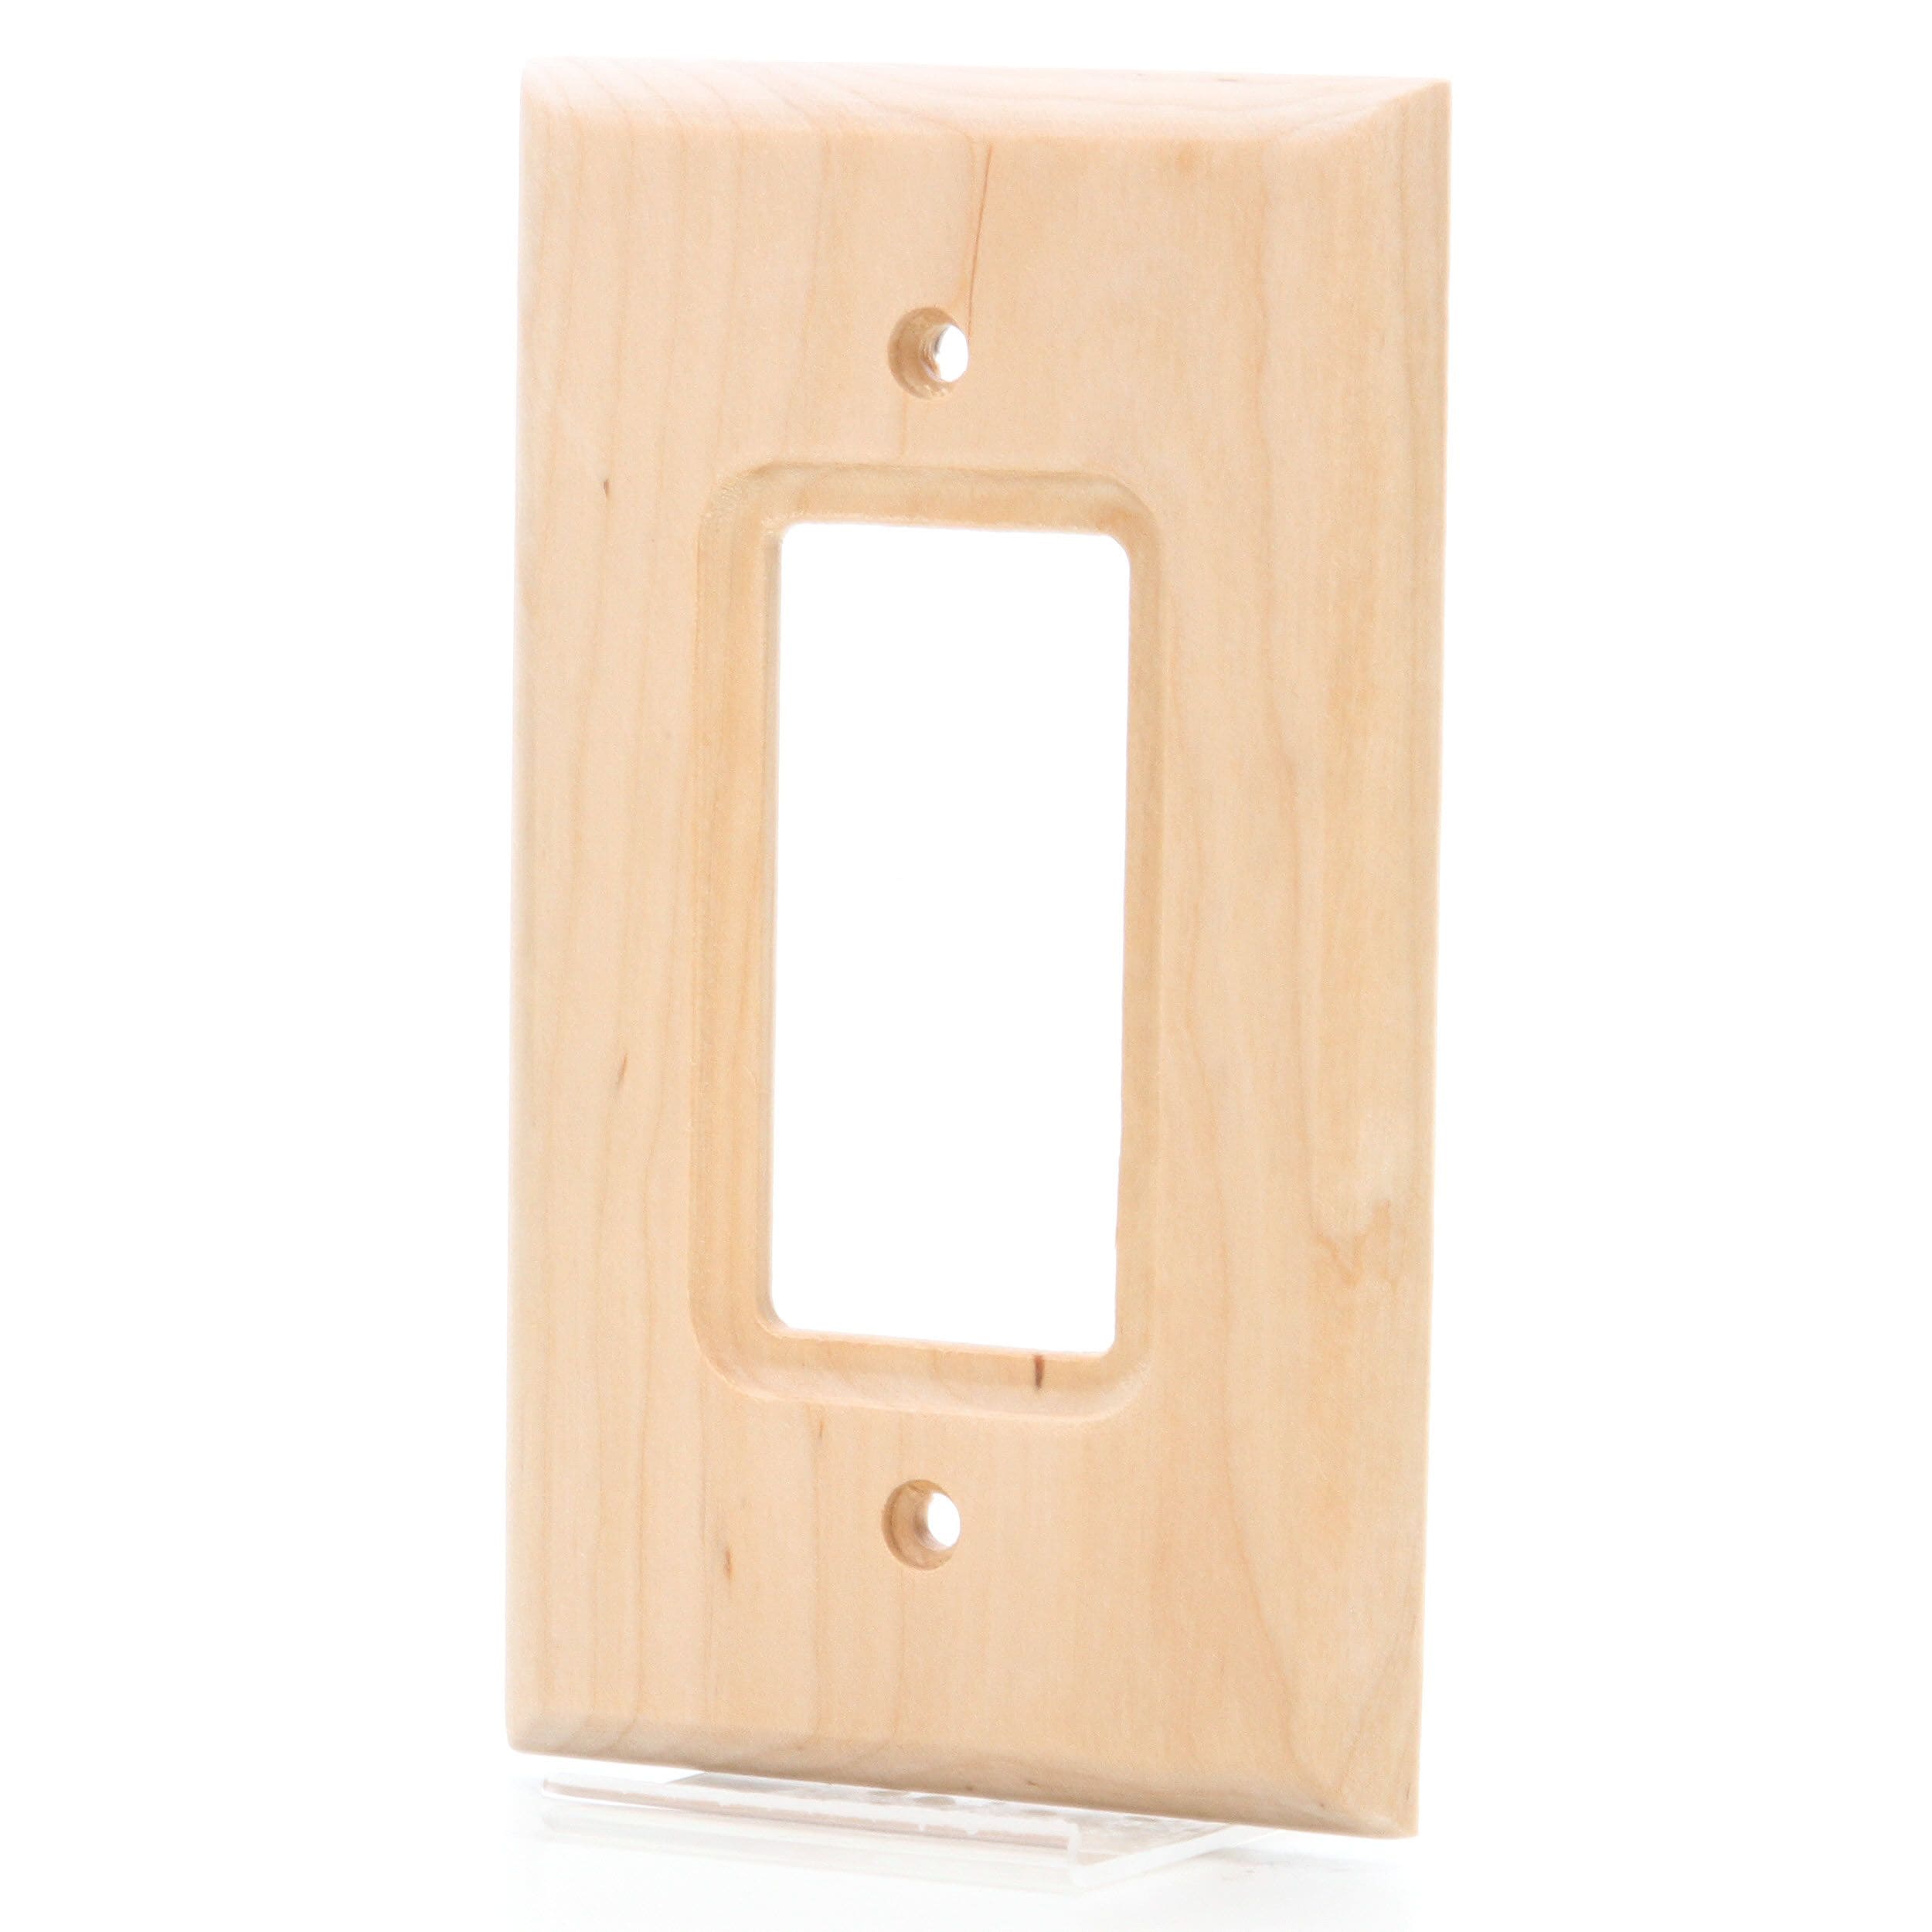 Unfinished Wood Brainerd 64663 Wood Square Single Coaxial Wall Plate 